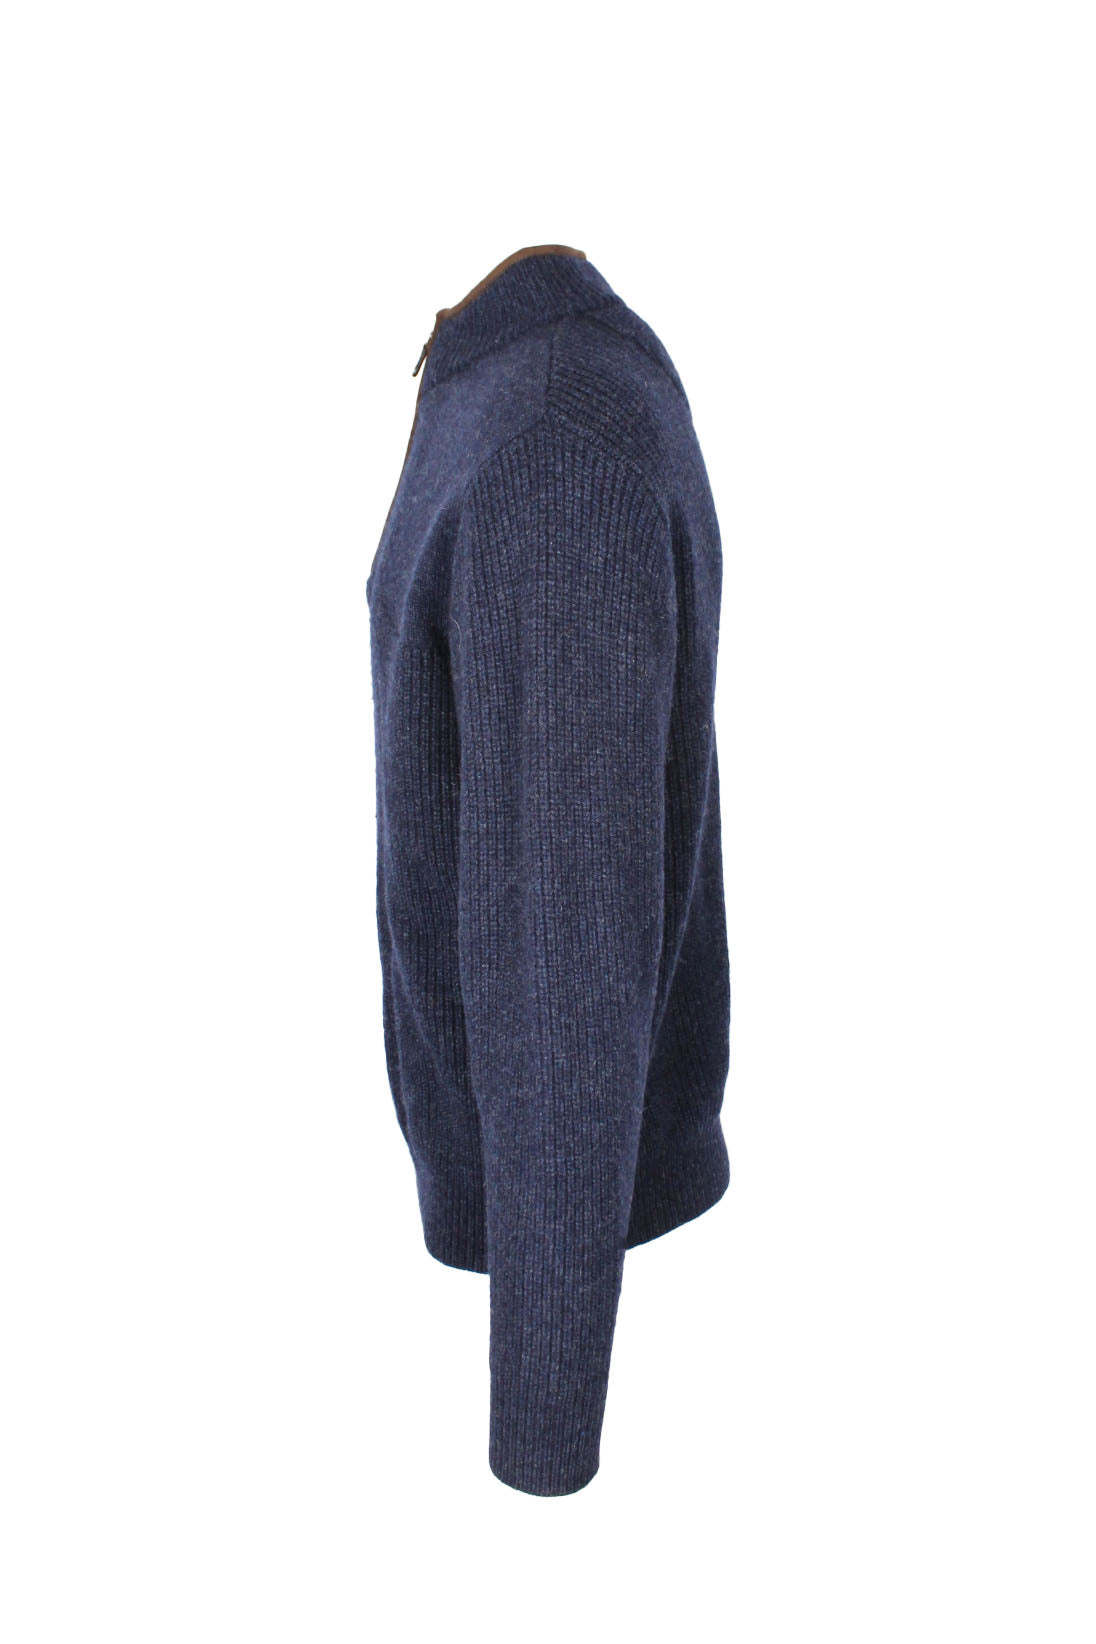 profile view with left sleeve of sweater.